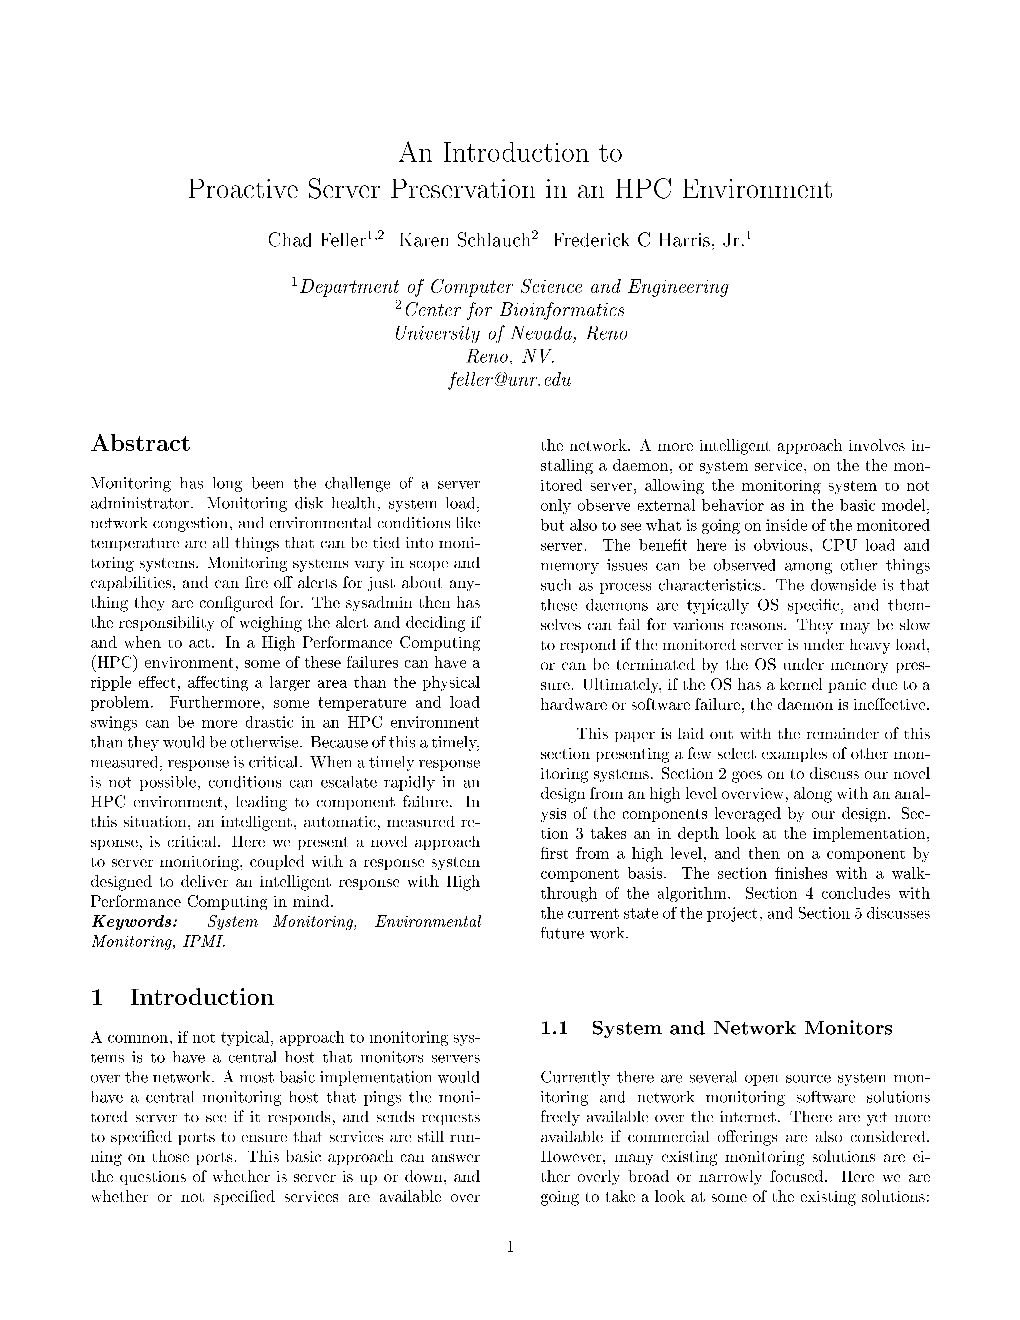 An Introduction to Proactive Server Preservation in an HPC Environment